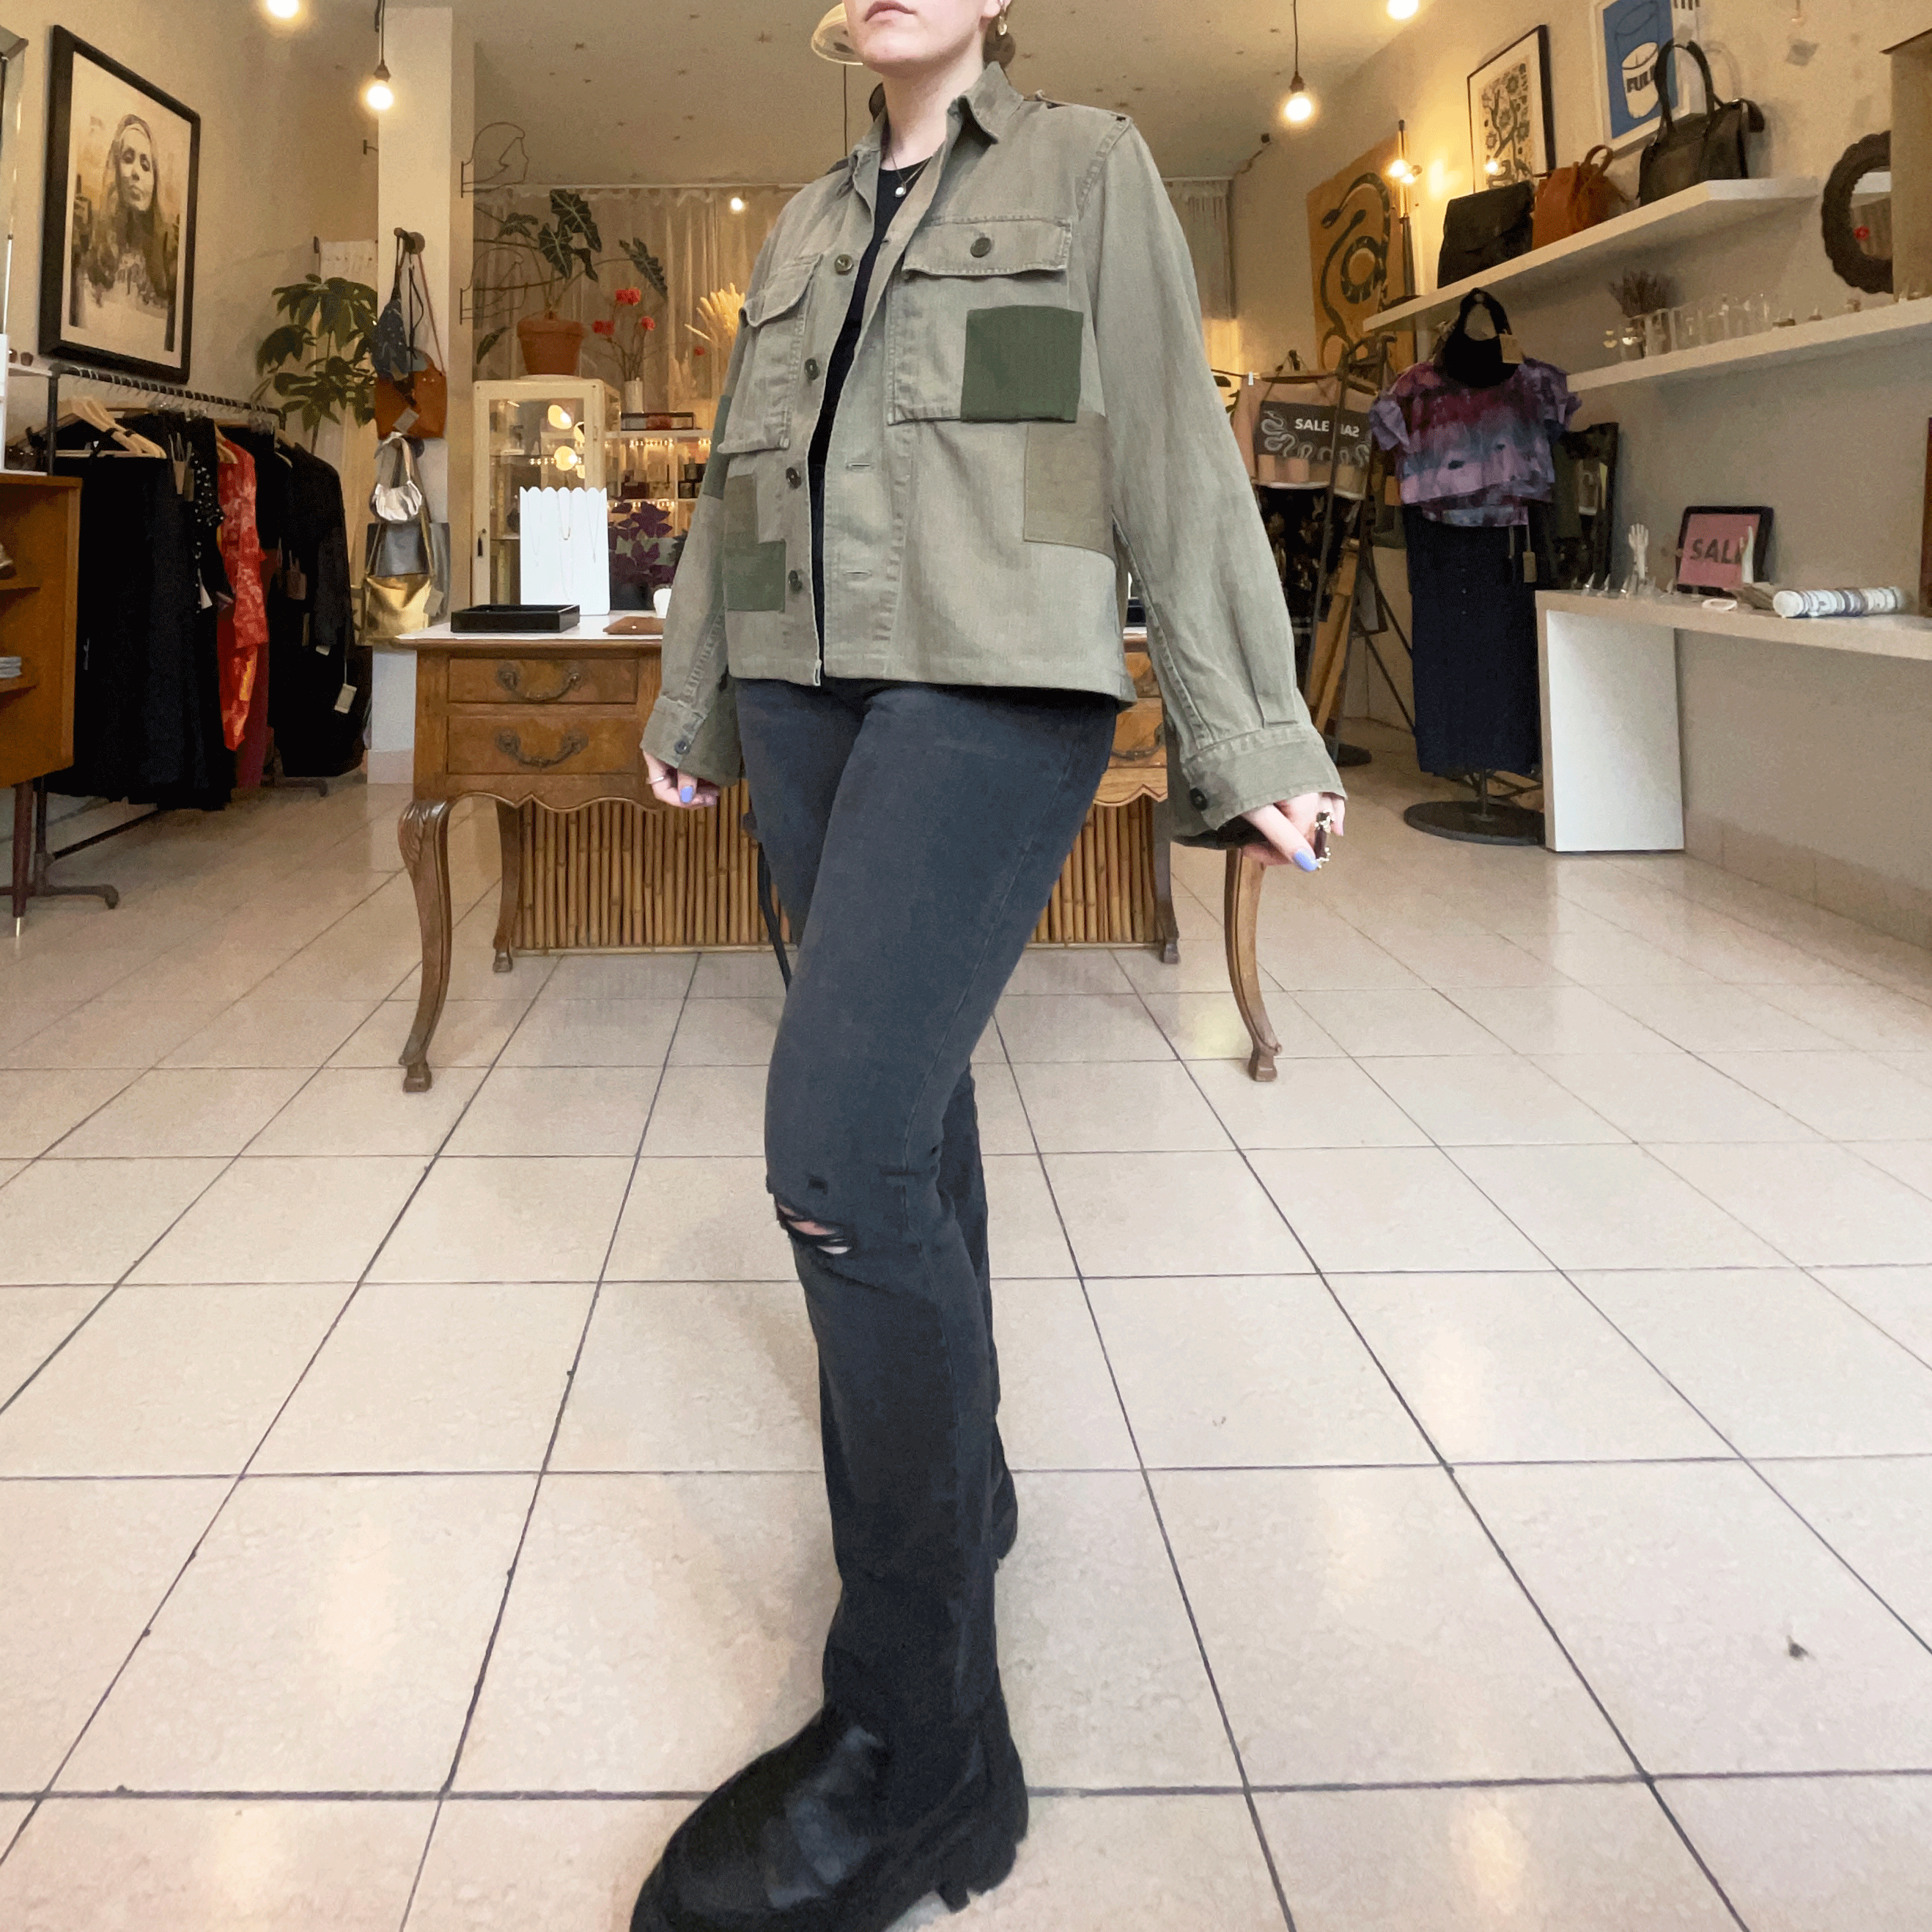 Military Patch Jacket